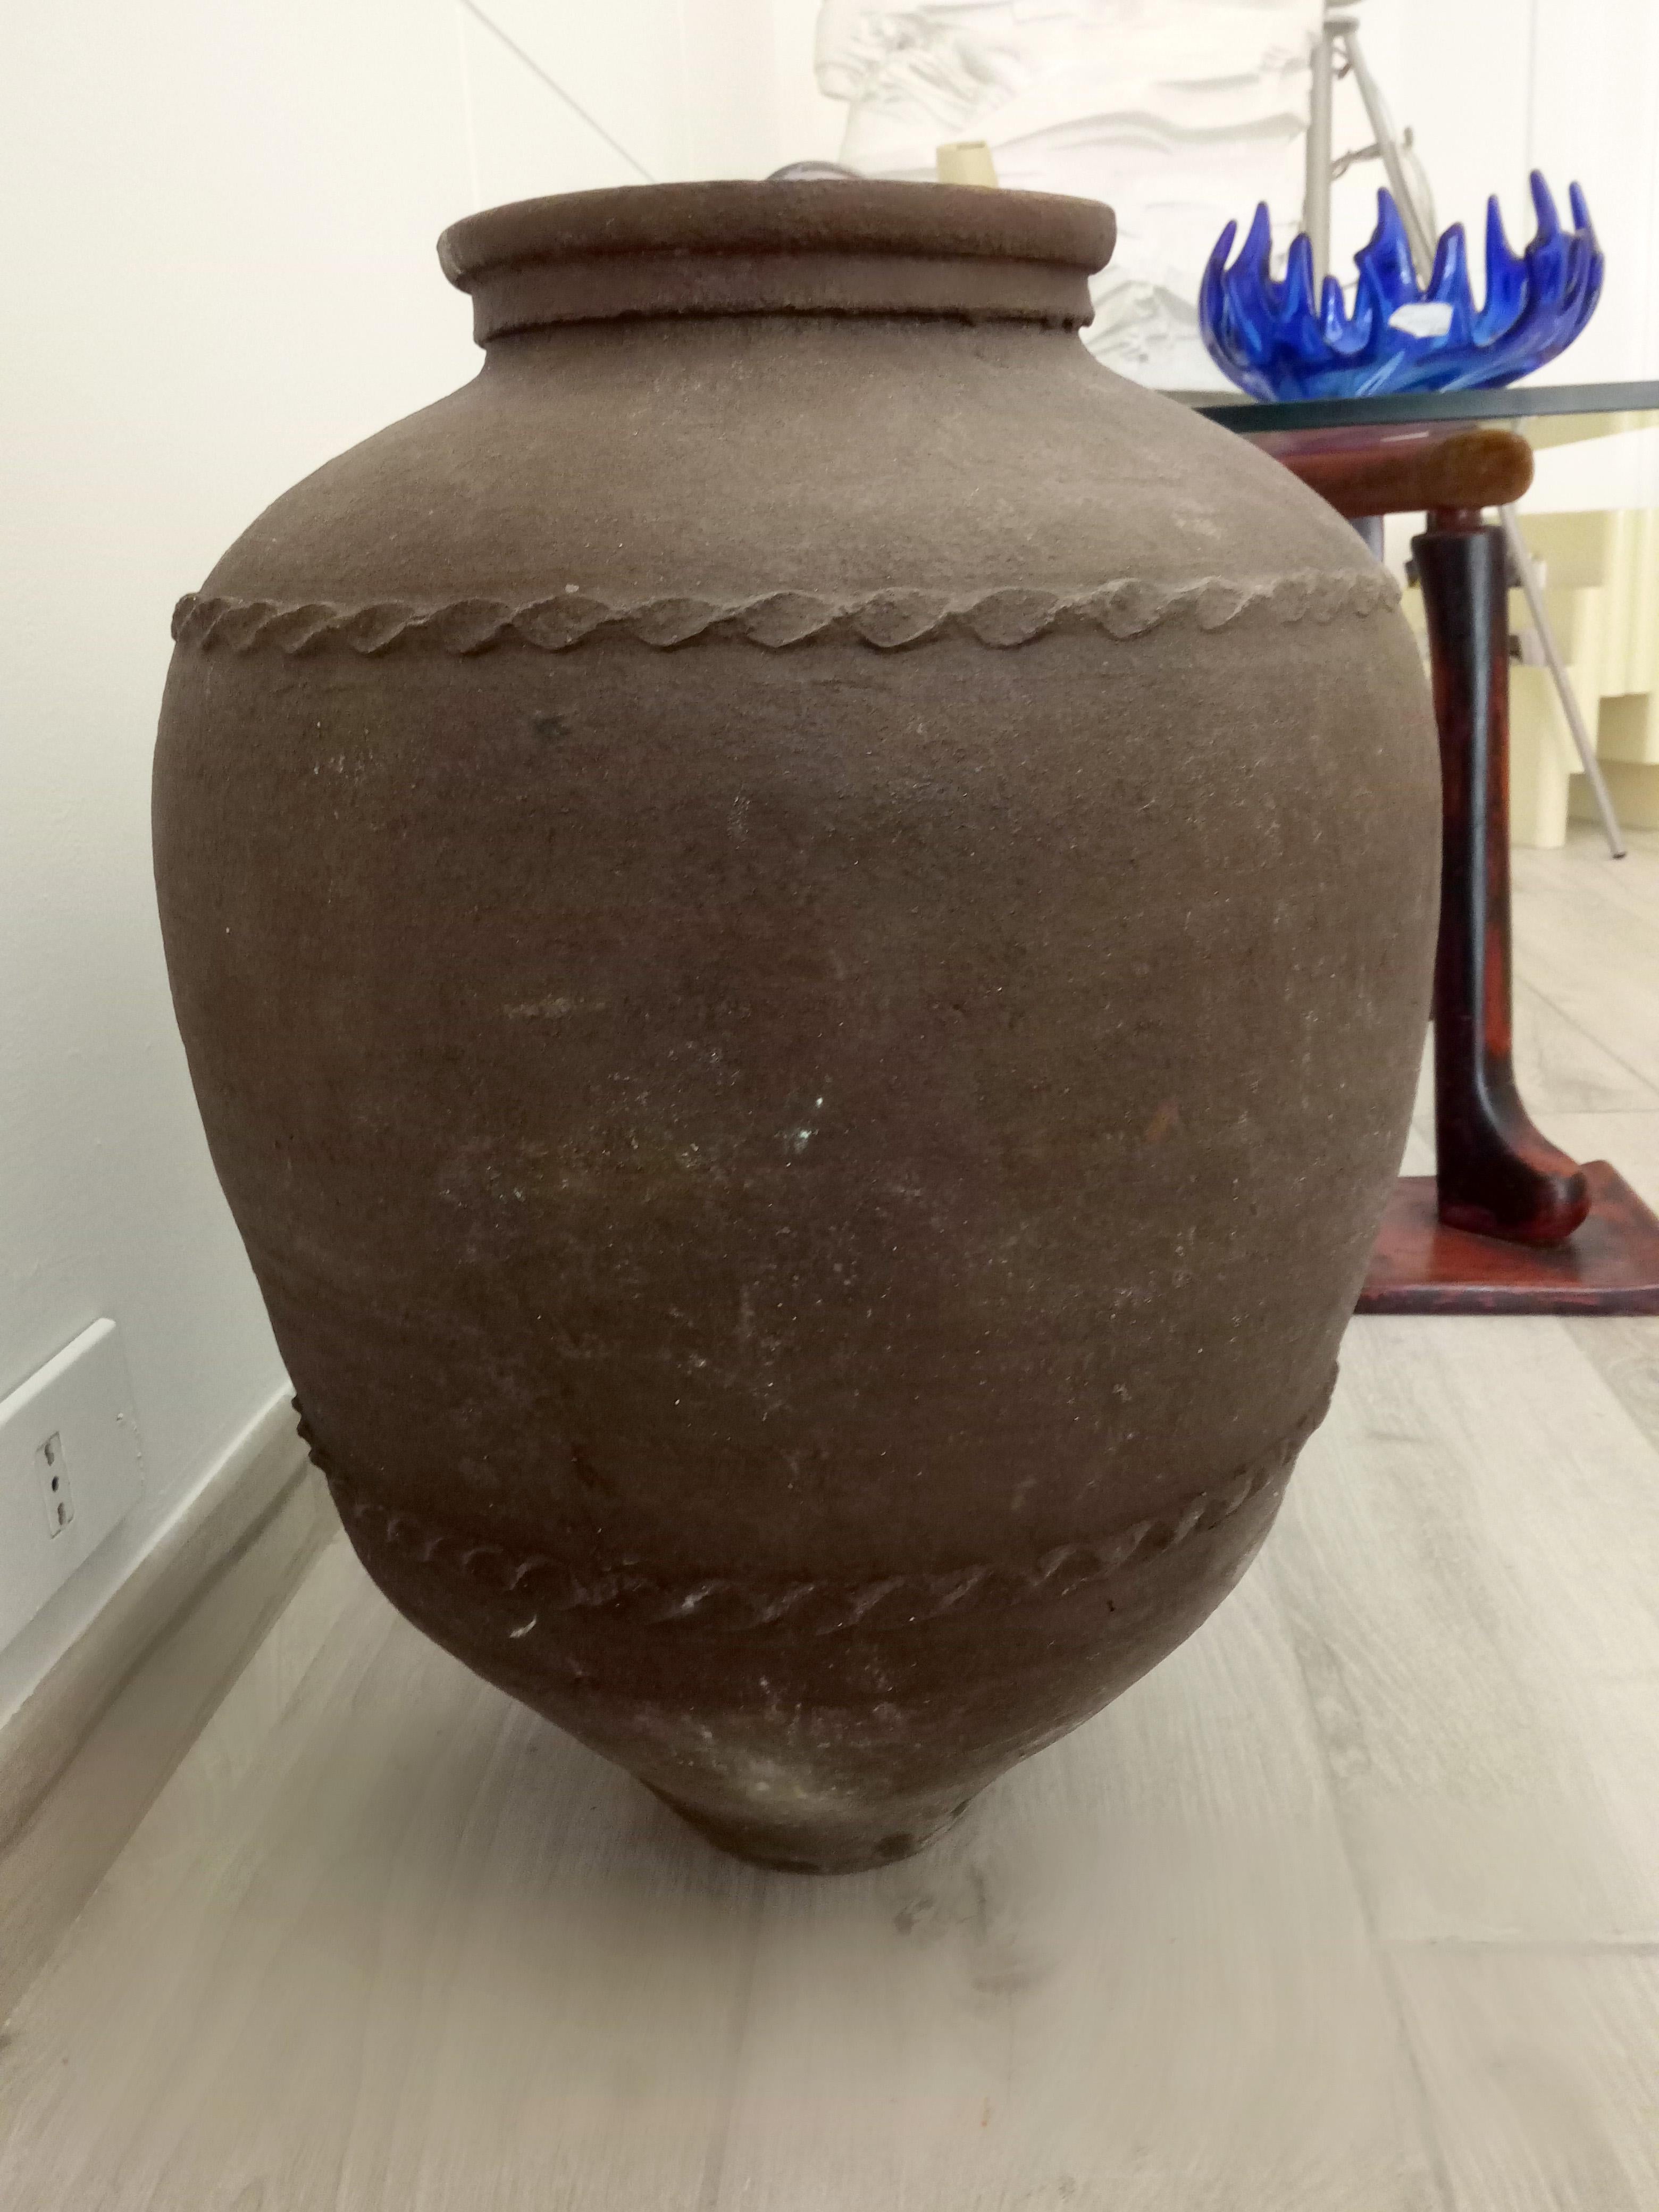 This impressive late, 19th century terracotta water jar was found in the town of Puglia in the South of Italy.